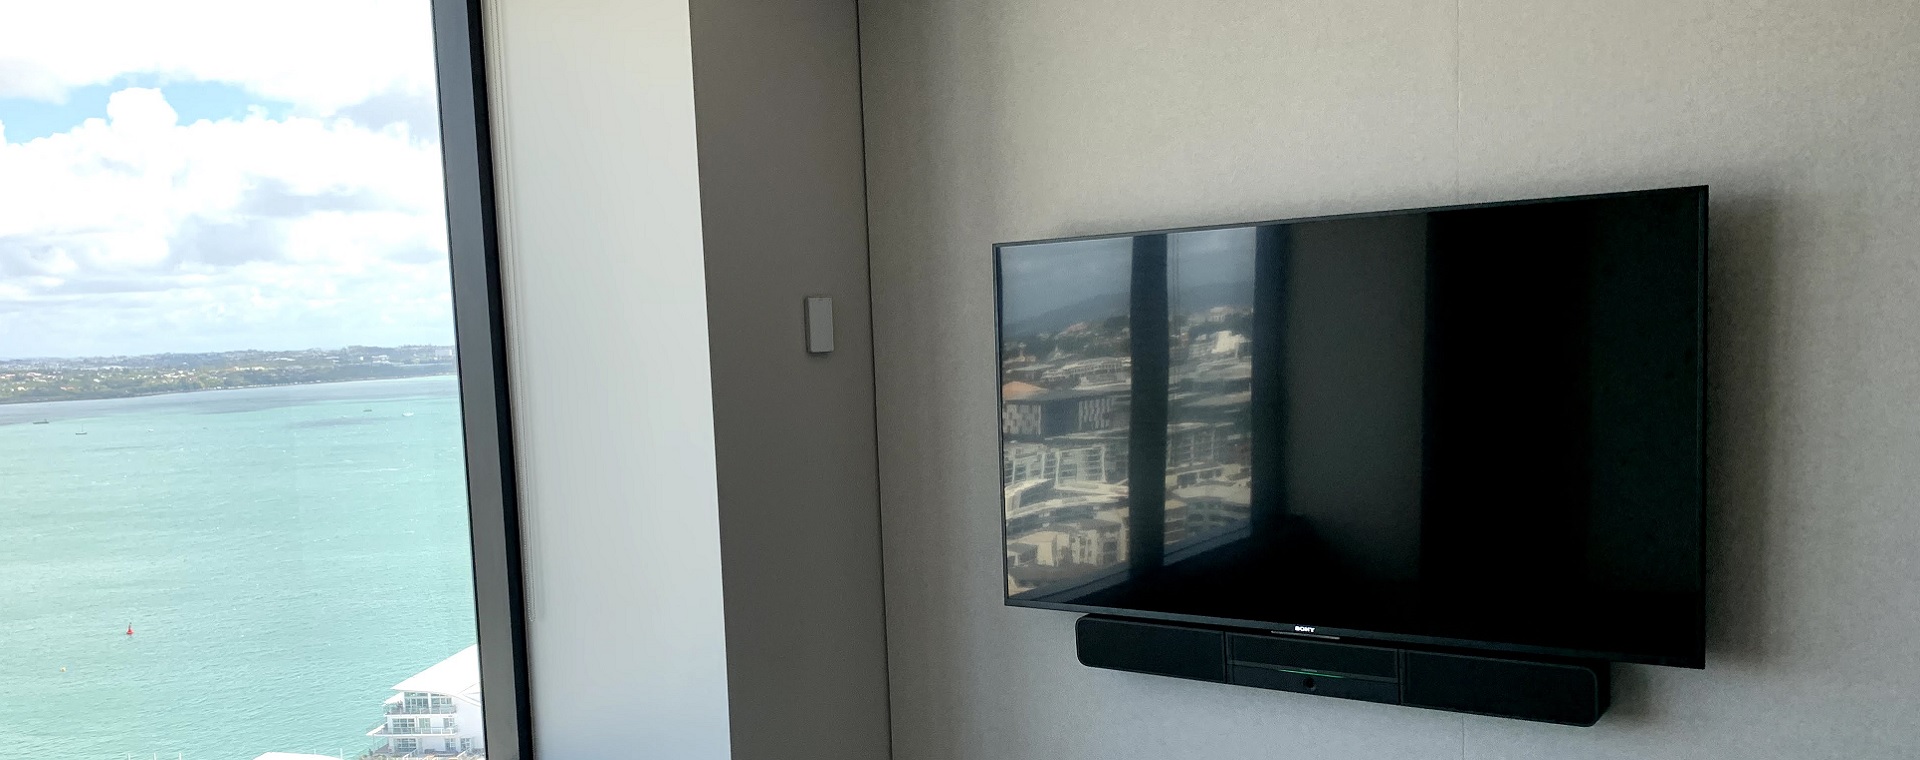 Display screen with soundbar beneath at Colliers Auckland offices